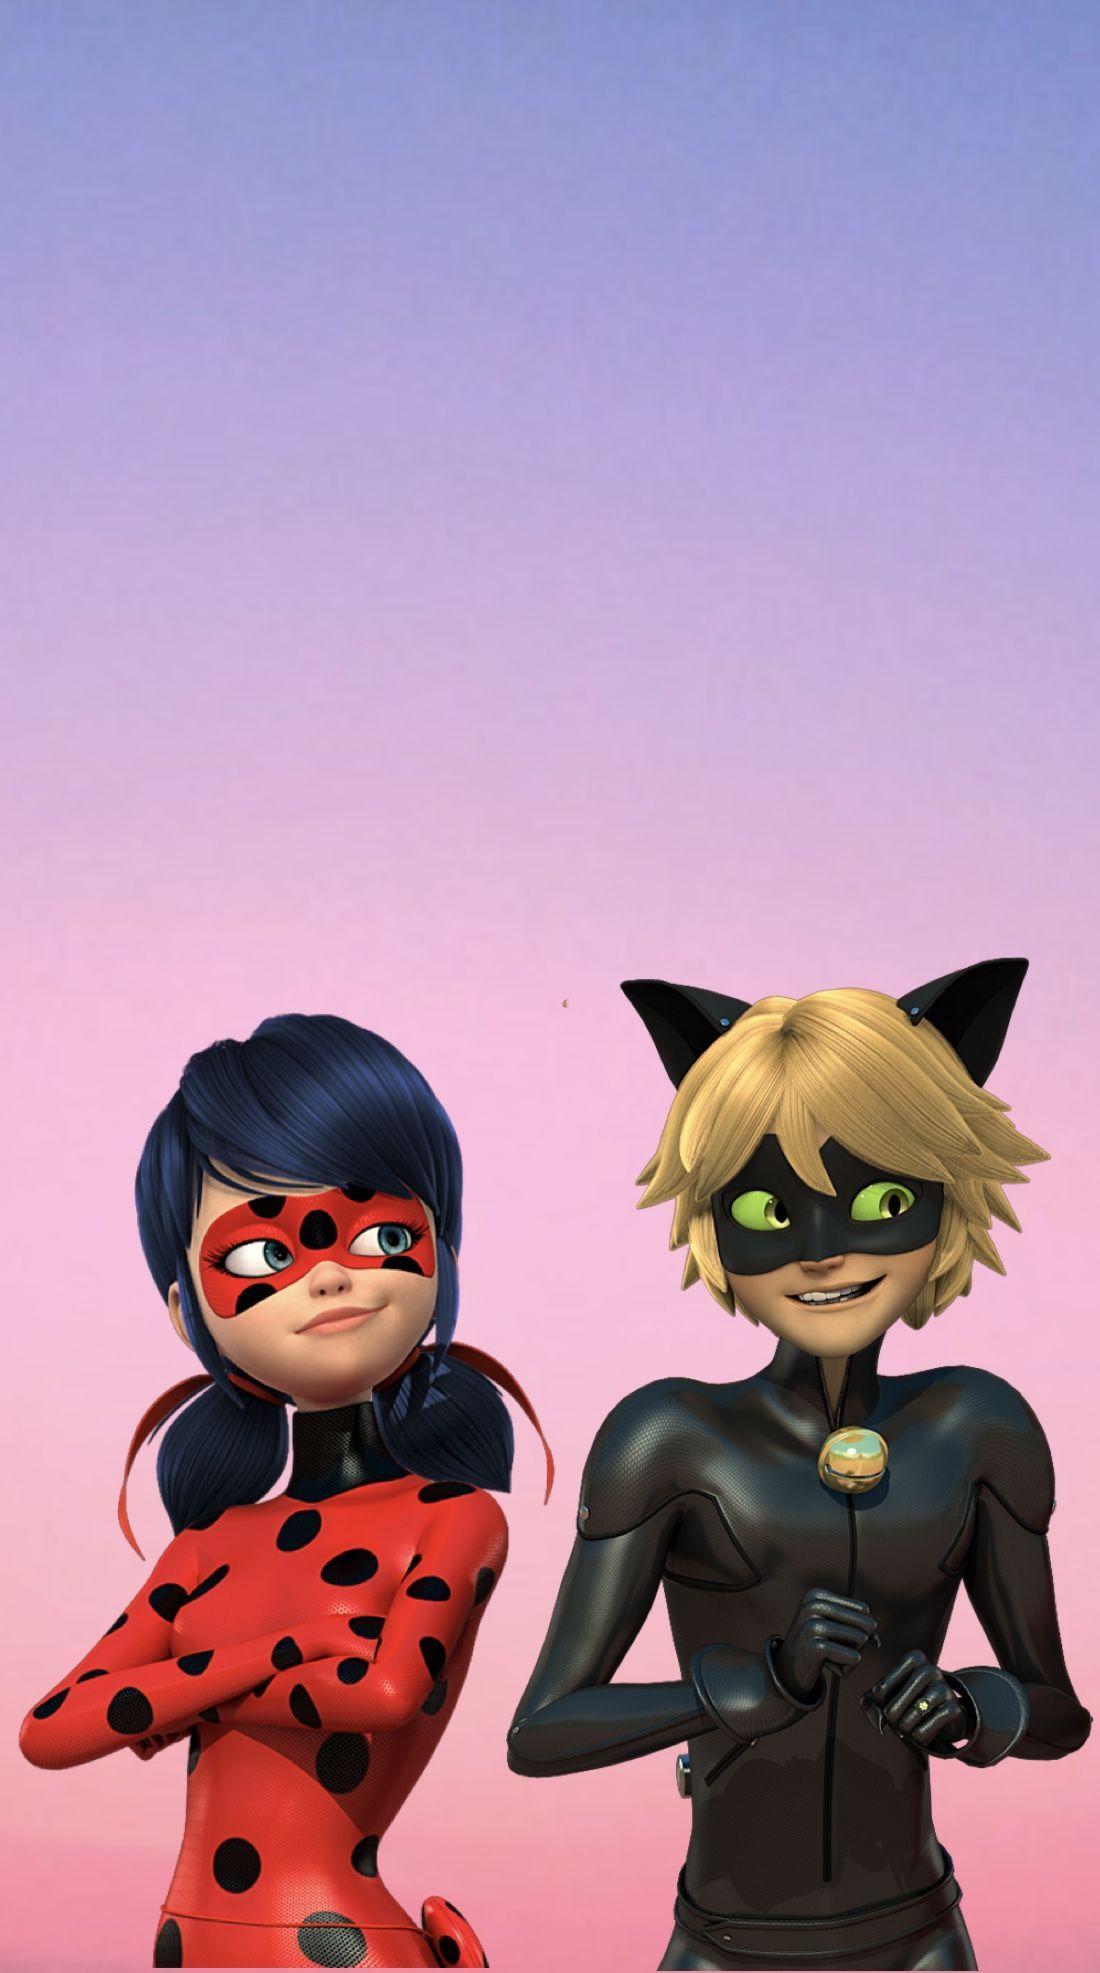 Anime Ladybug And Cat Noir Wallpapers - Wallpaper Cave